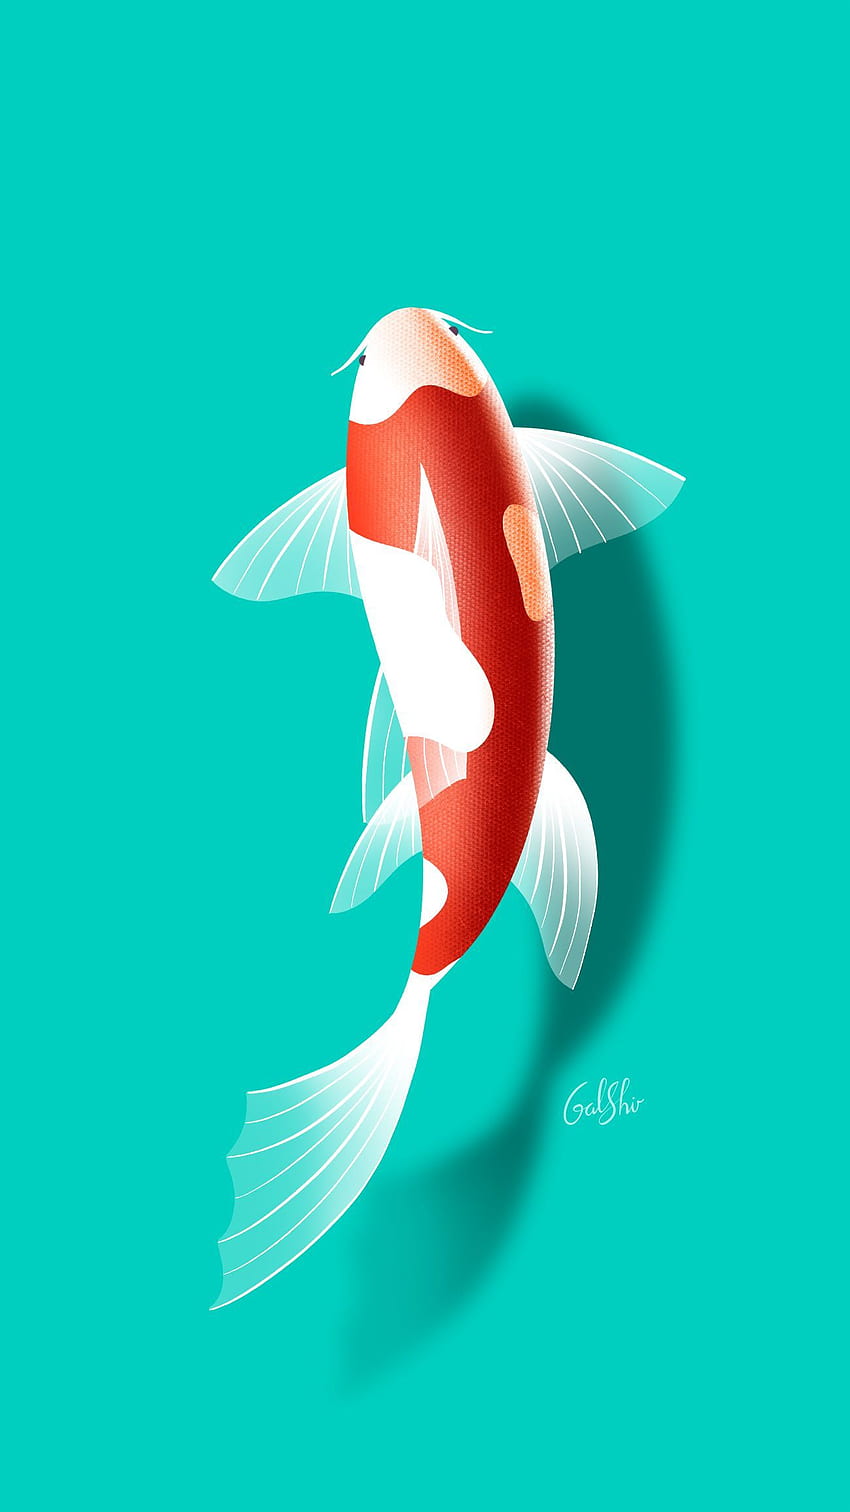 Koi fish Wallpaper - Peel and Stick or Non-Pasted